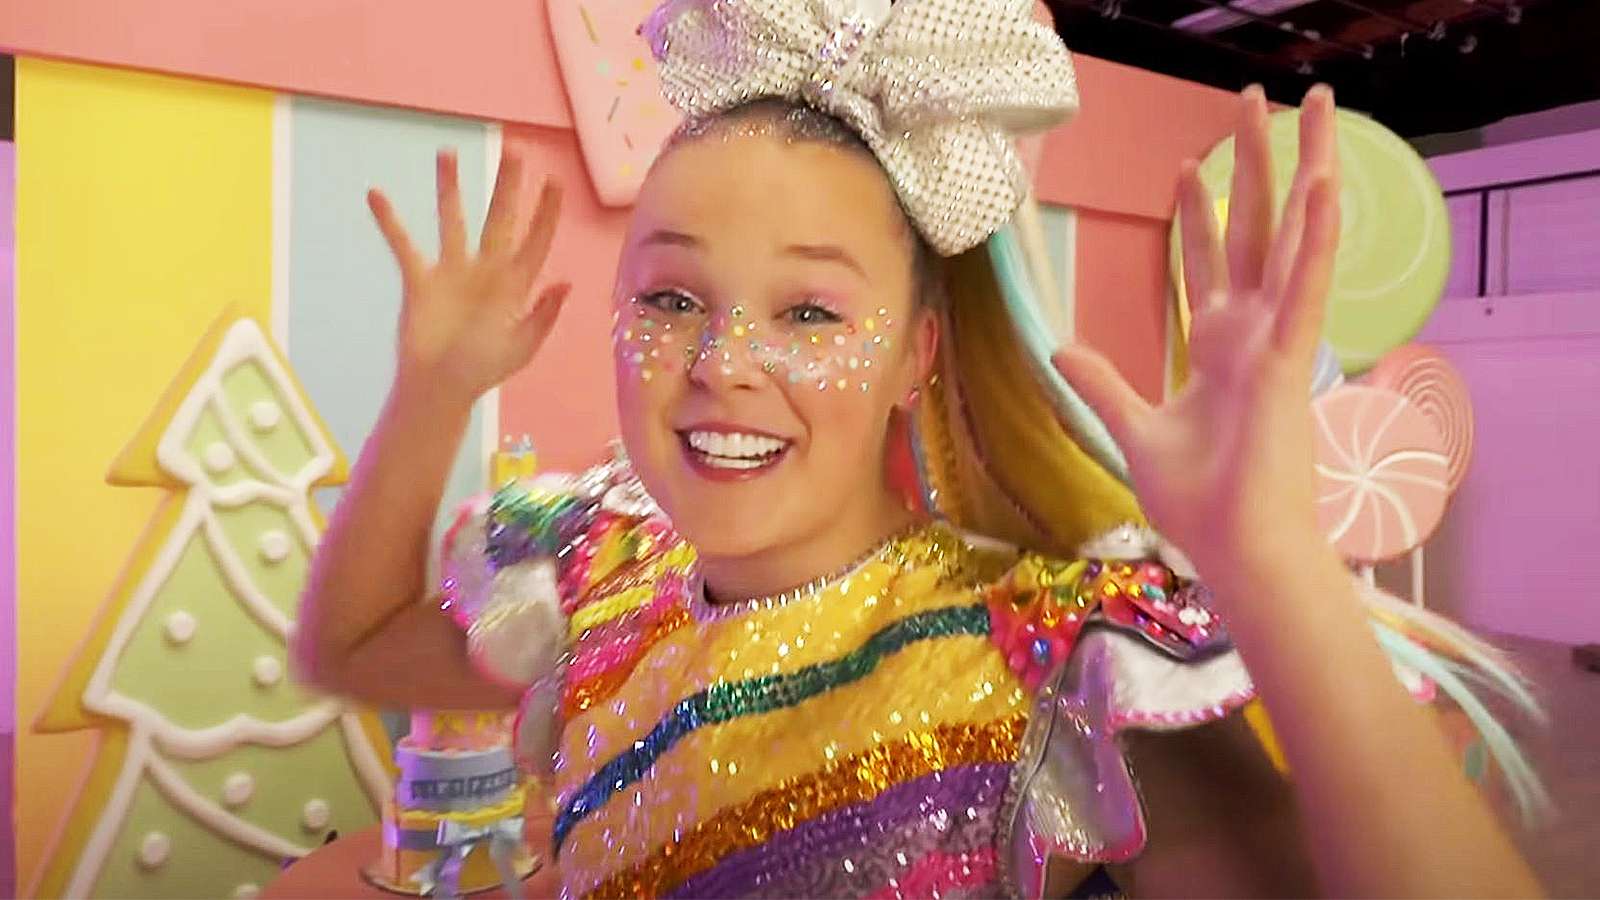 JoJo Siwa shares first photos with new girlfriend: “Happiest I've ever  been” - Dexerto